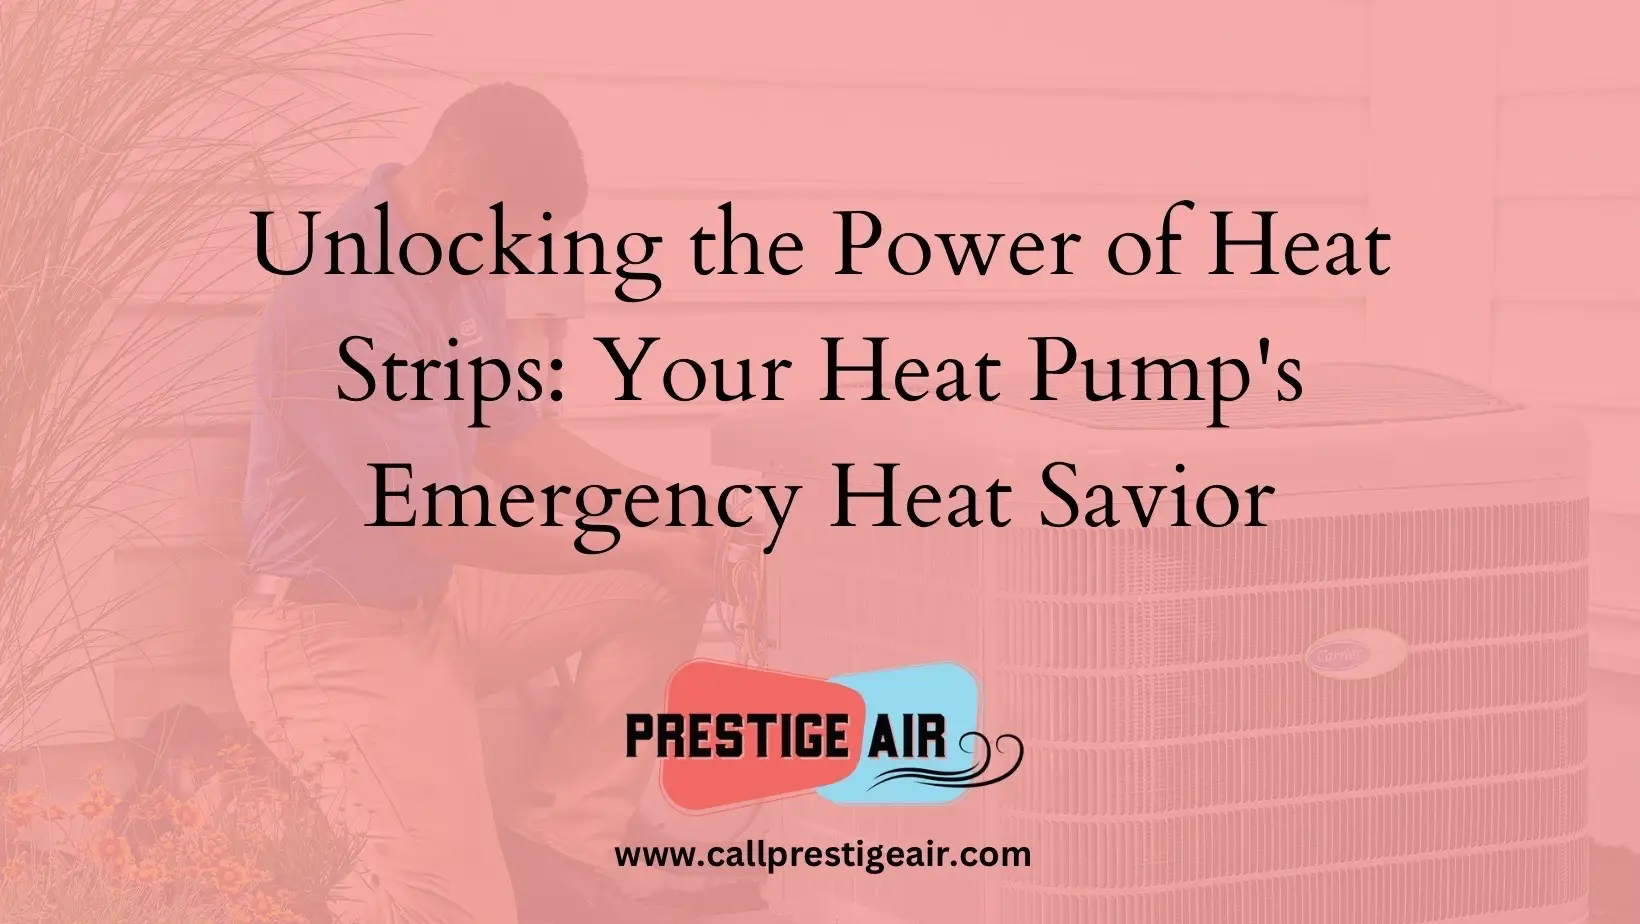 Heat pumps and heat strips